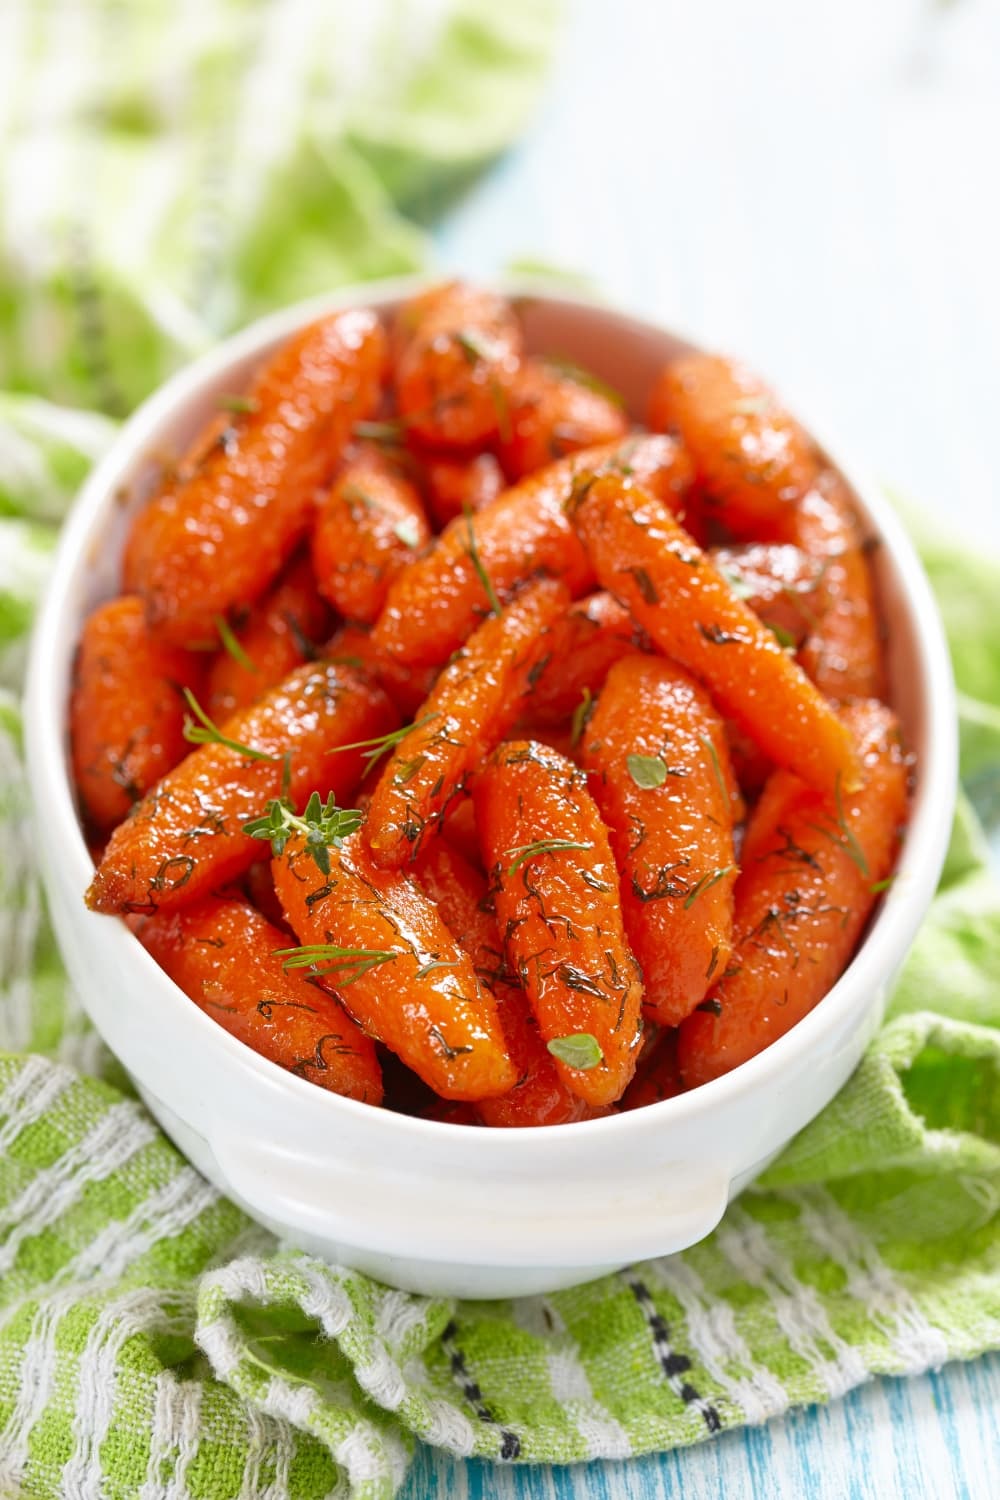 Bowl of homemade Glazed Carrots garnished with thyme